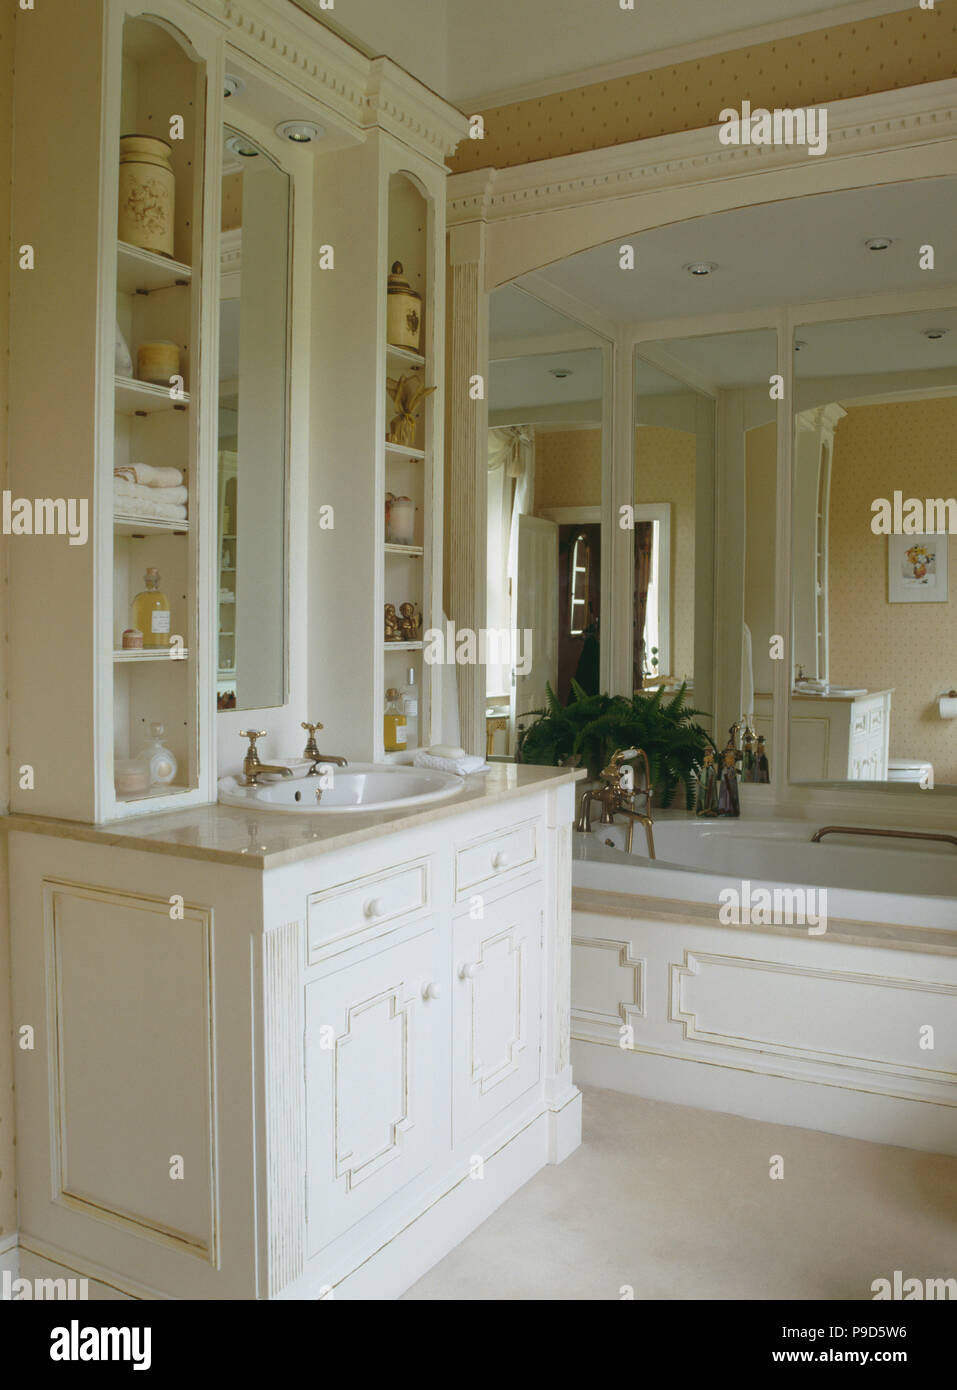 Basin in fitted vanity unit in bathroom with large mirror above bath Stock Photo